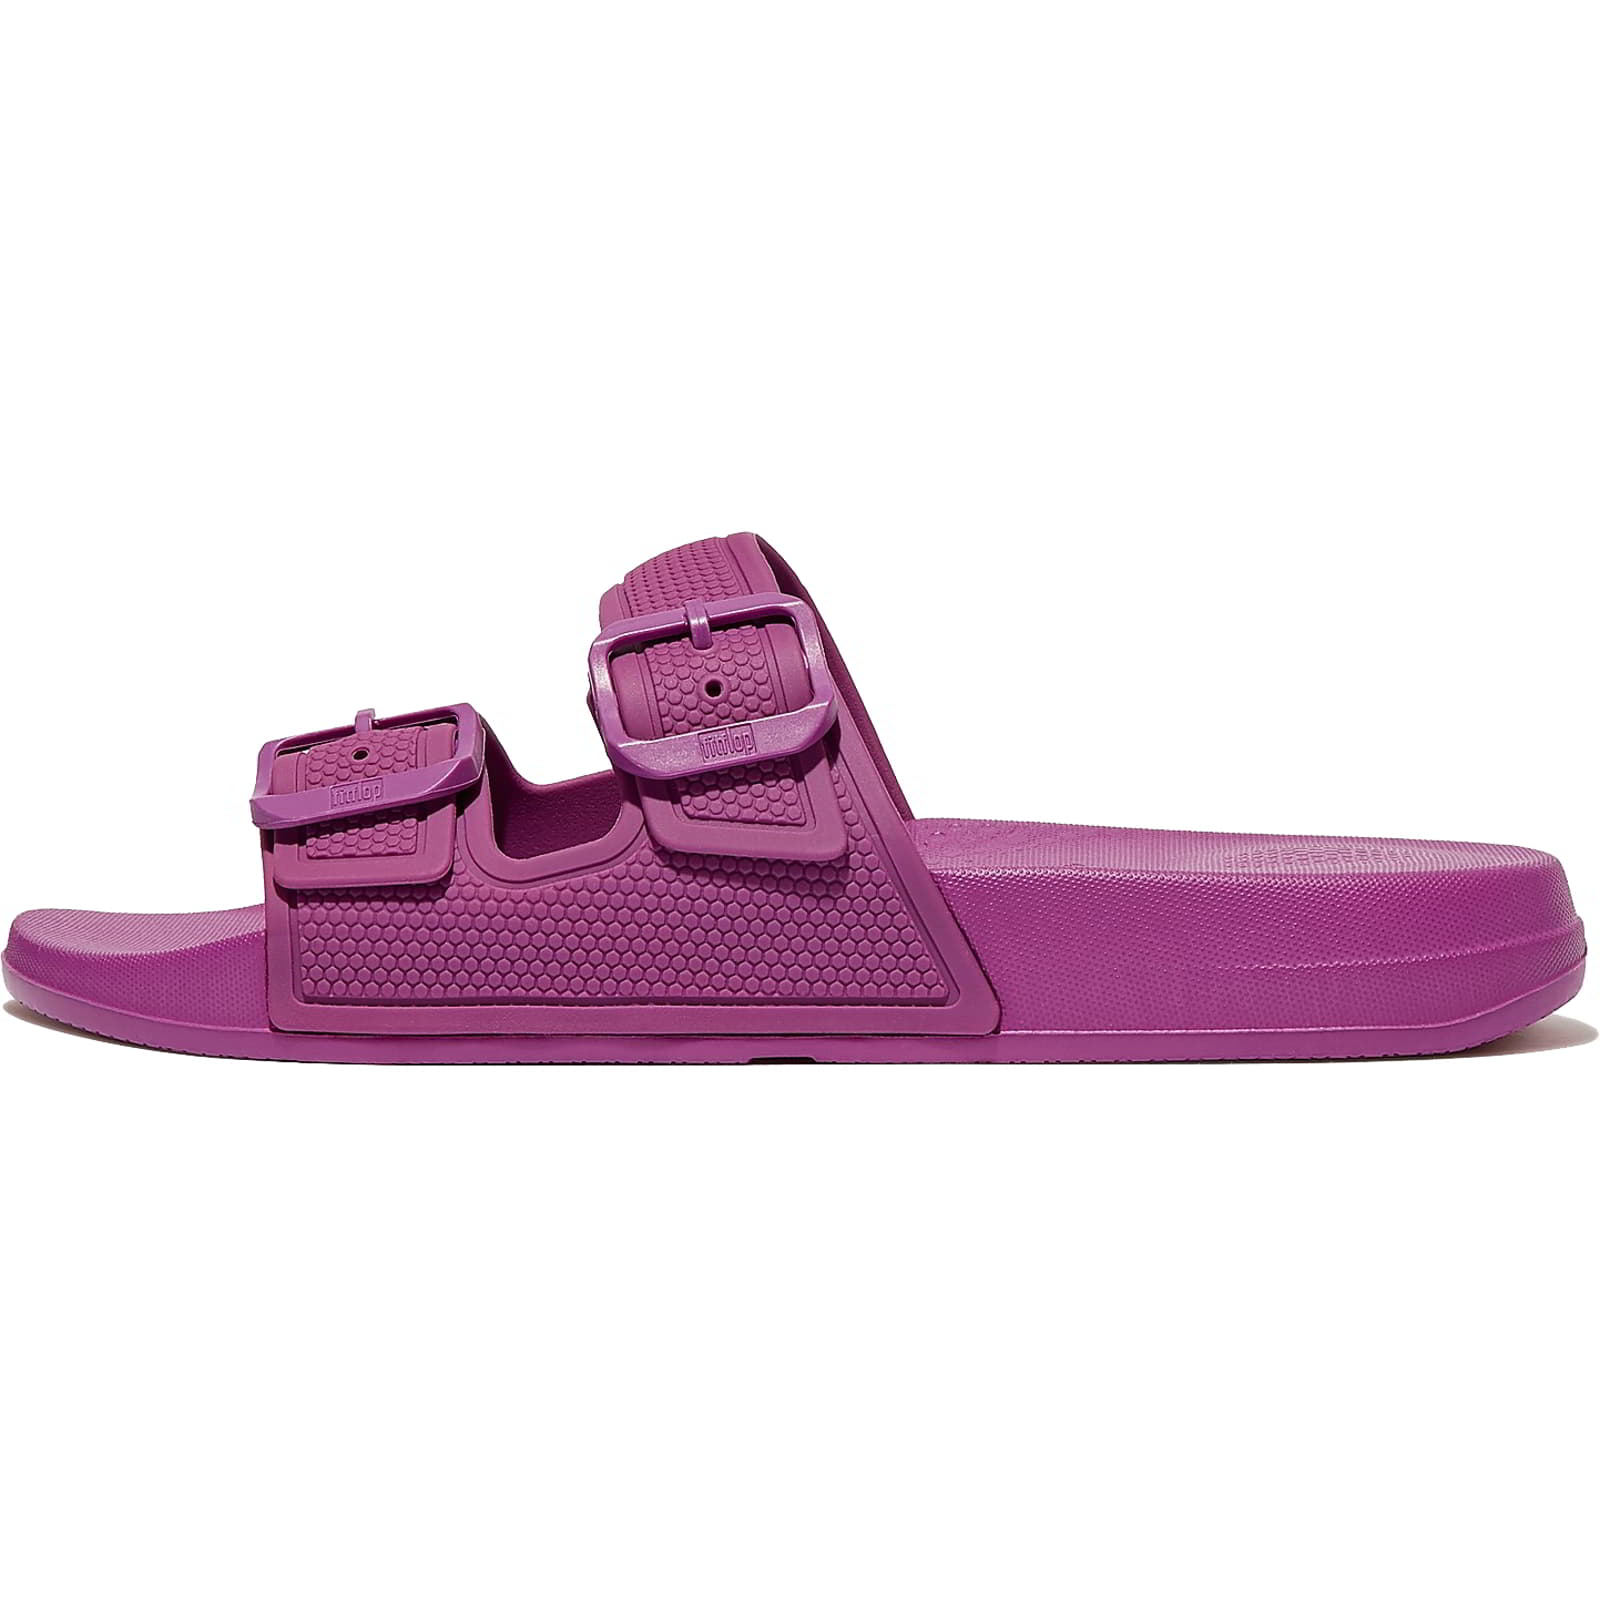 FitFlop Women's Iqushion Pool Slides Sandals - UK 7